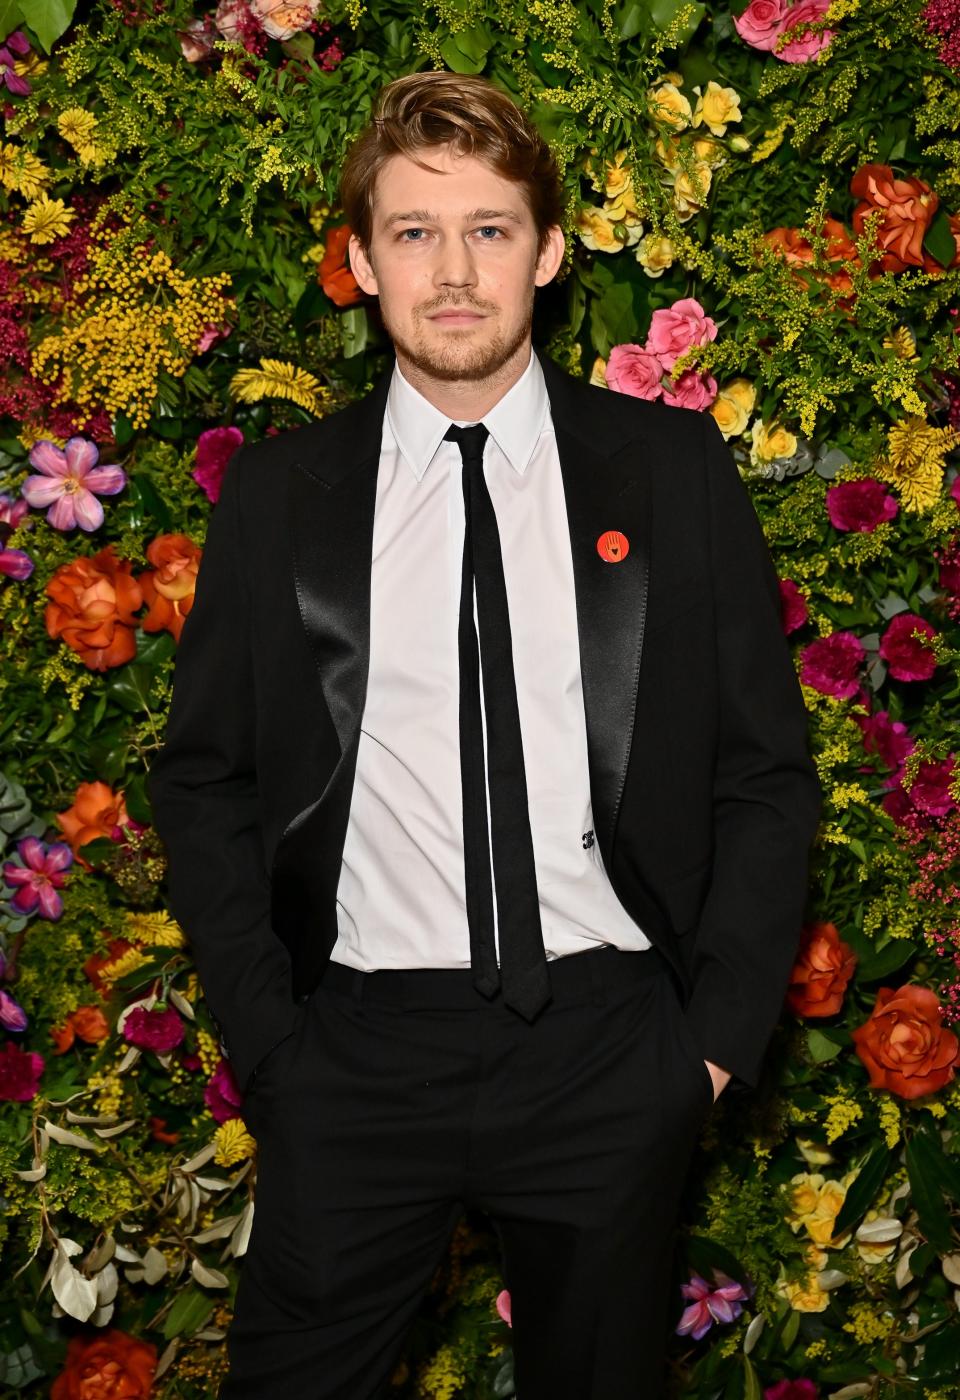 Joe Alwyn standing in front of a floral backdrop wearing a black suit, white shirt, black tie, and red lapel pin